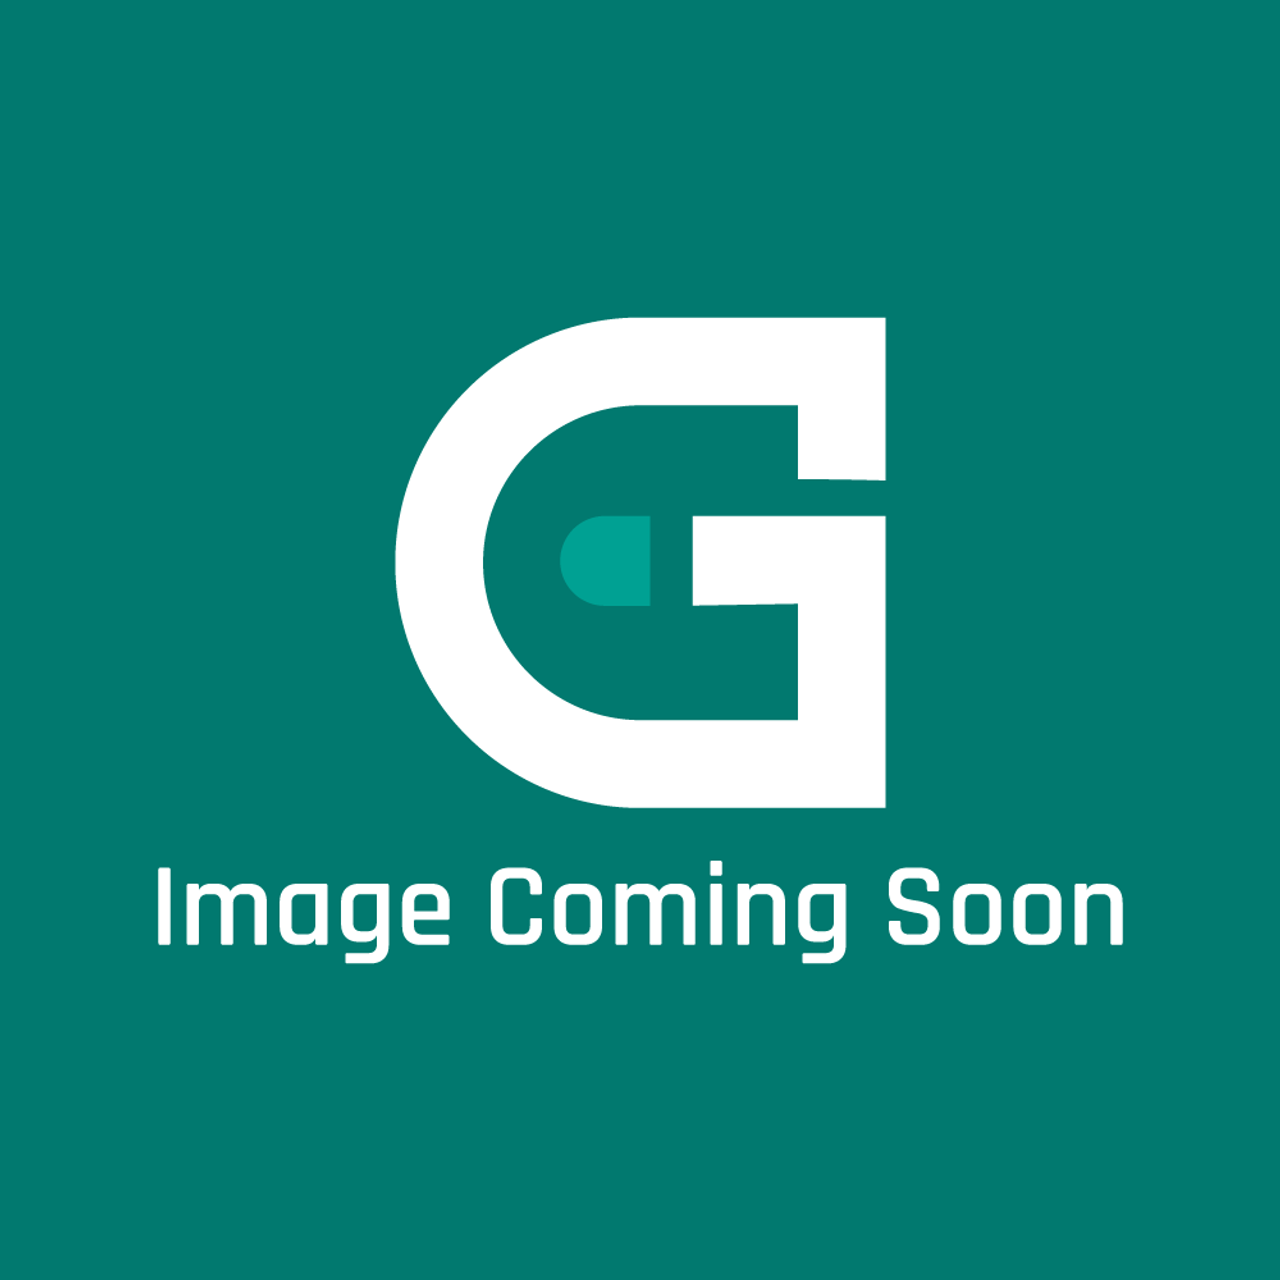 Frigidaire - Electrolux 5304502086 Panel - Image Coming Soon!